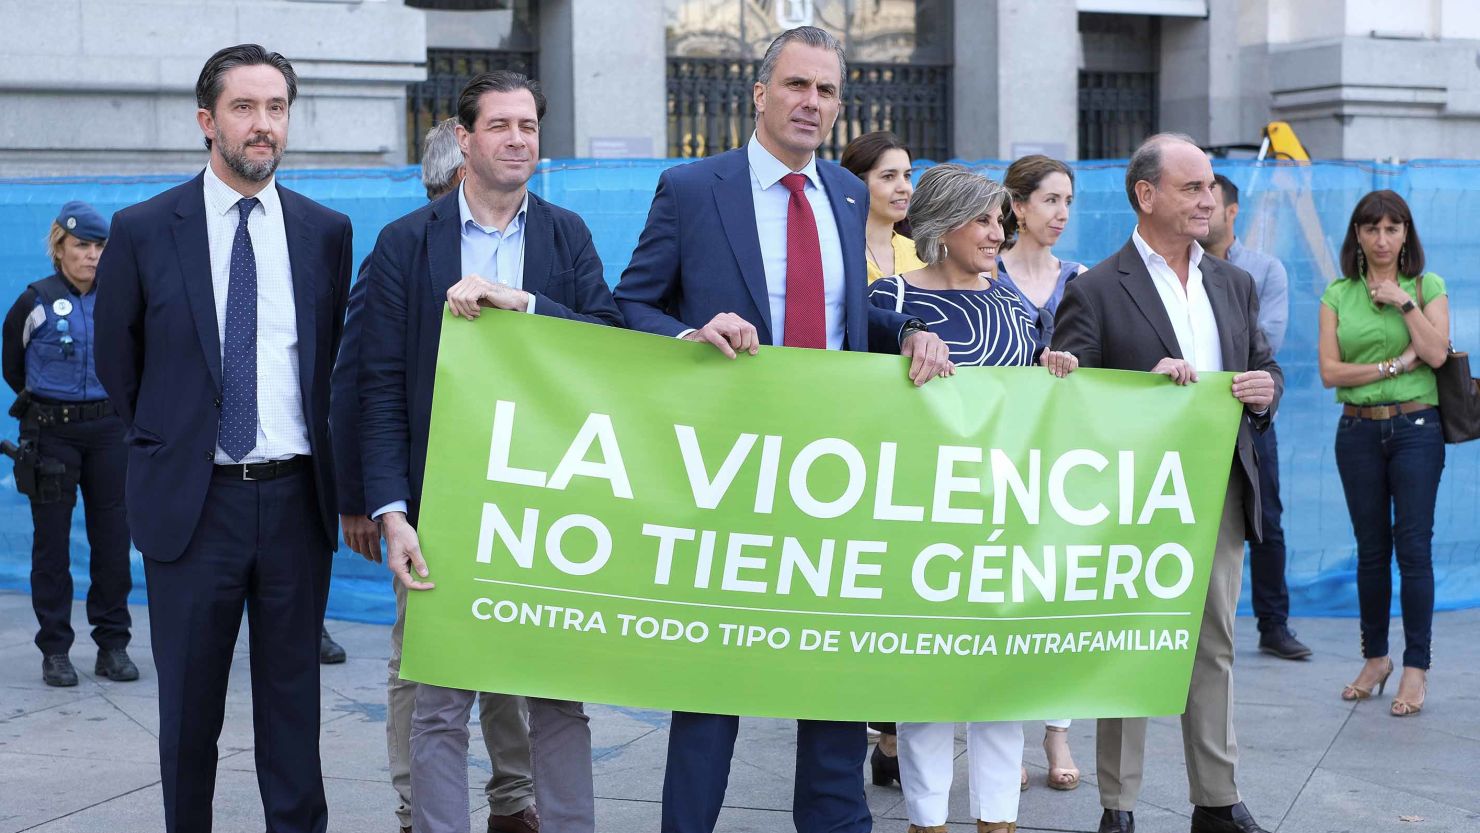 Vox spokesman Javier Ortega Smith (center) takes part in a minute's silence for a victim of gender-based violence with a banner that reads: "Violence has no gender. Against all types of domestic violence."